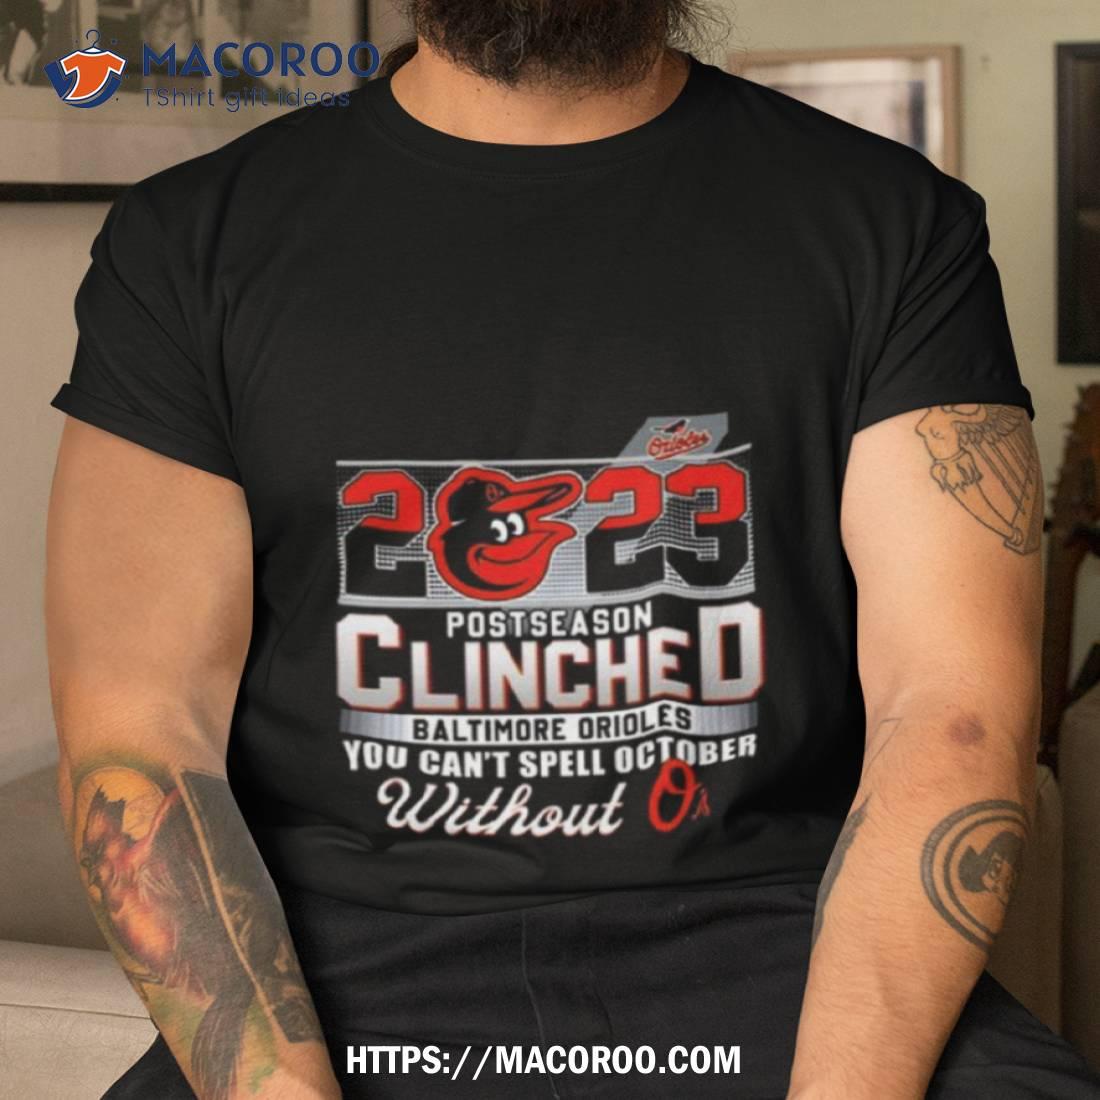 Baltimore Orioles 2023 Postseason Clinched You Can't Spell October